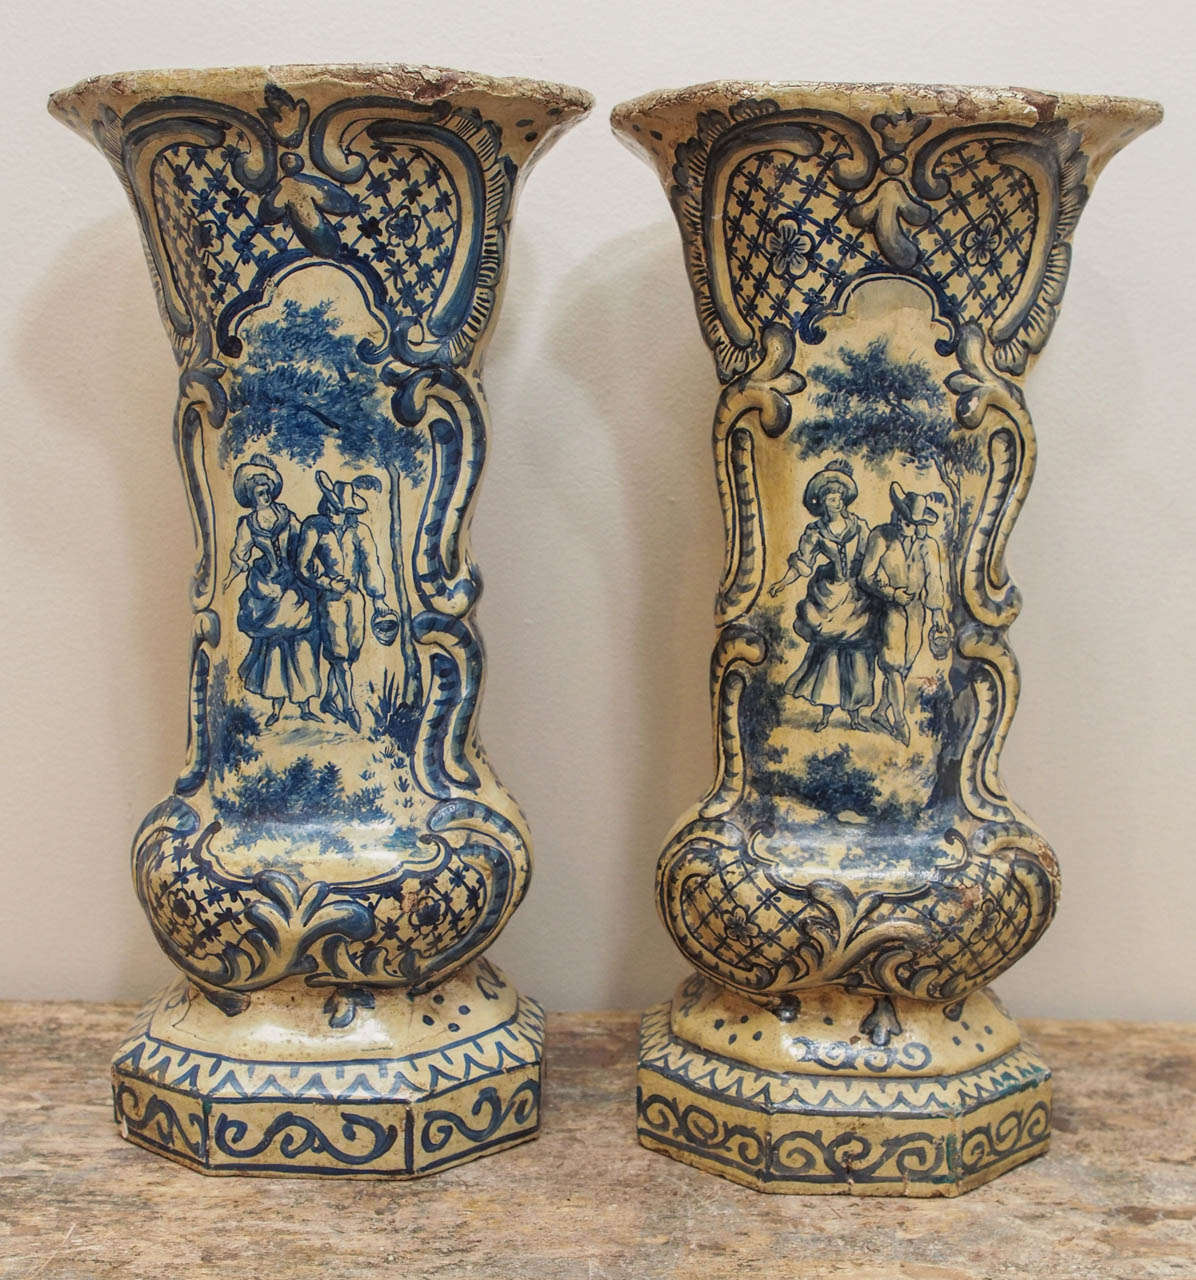 A pair of rococo style papier mache vases, which we've dubbed 